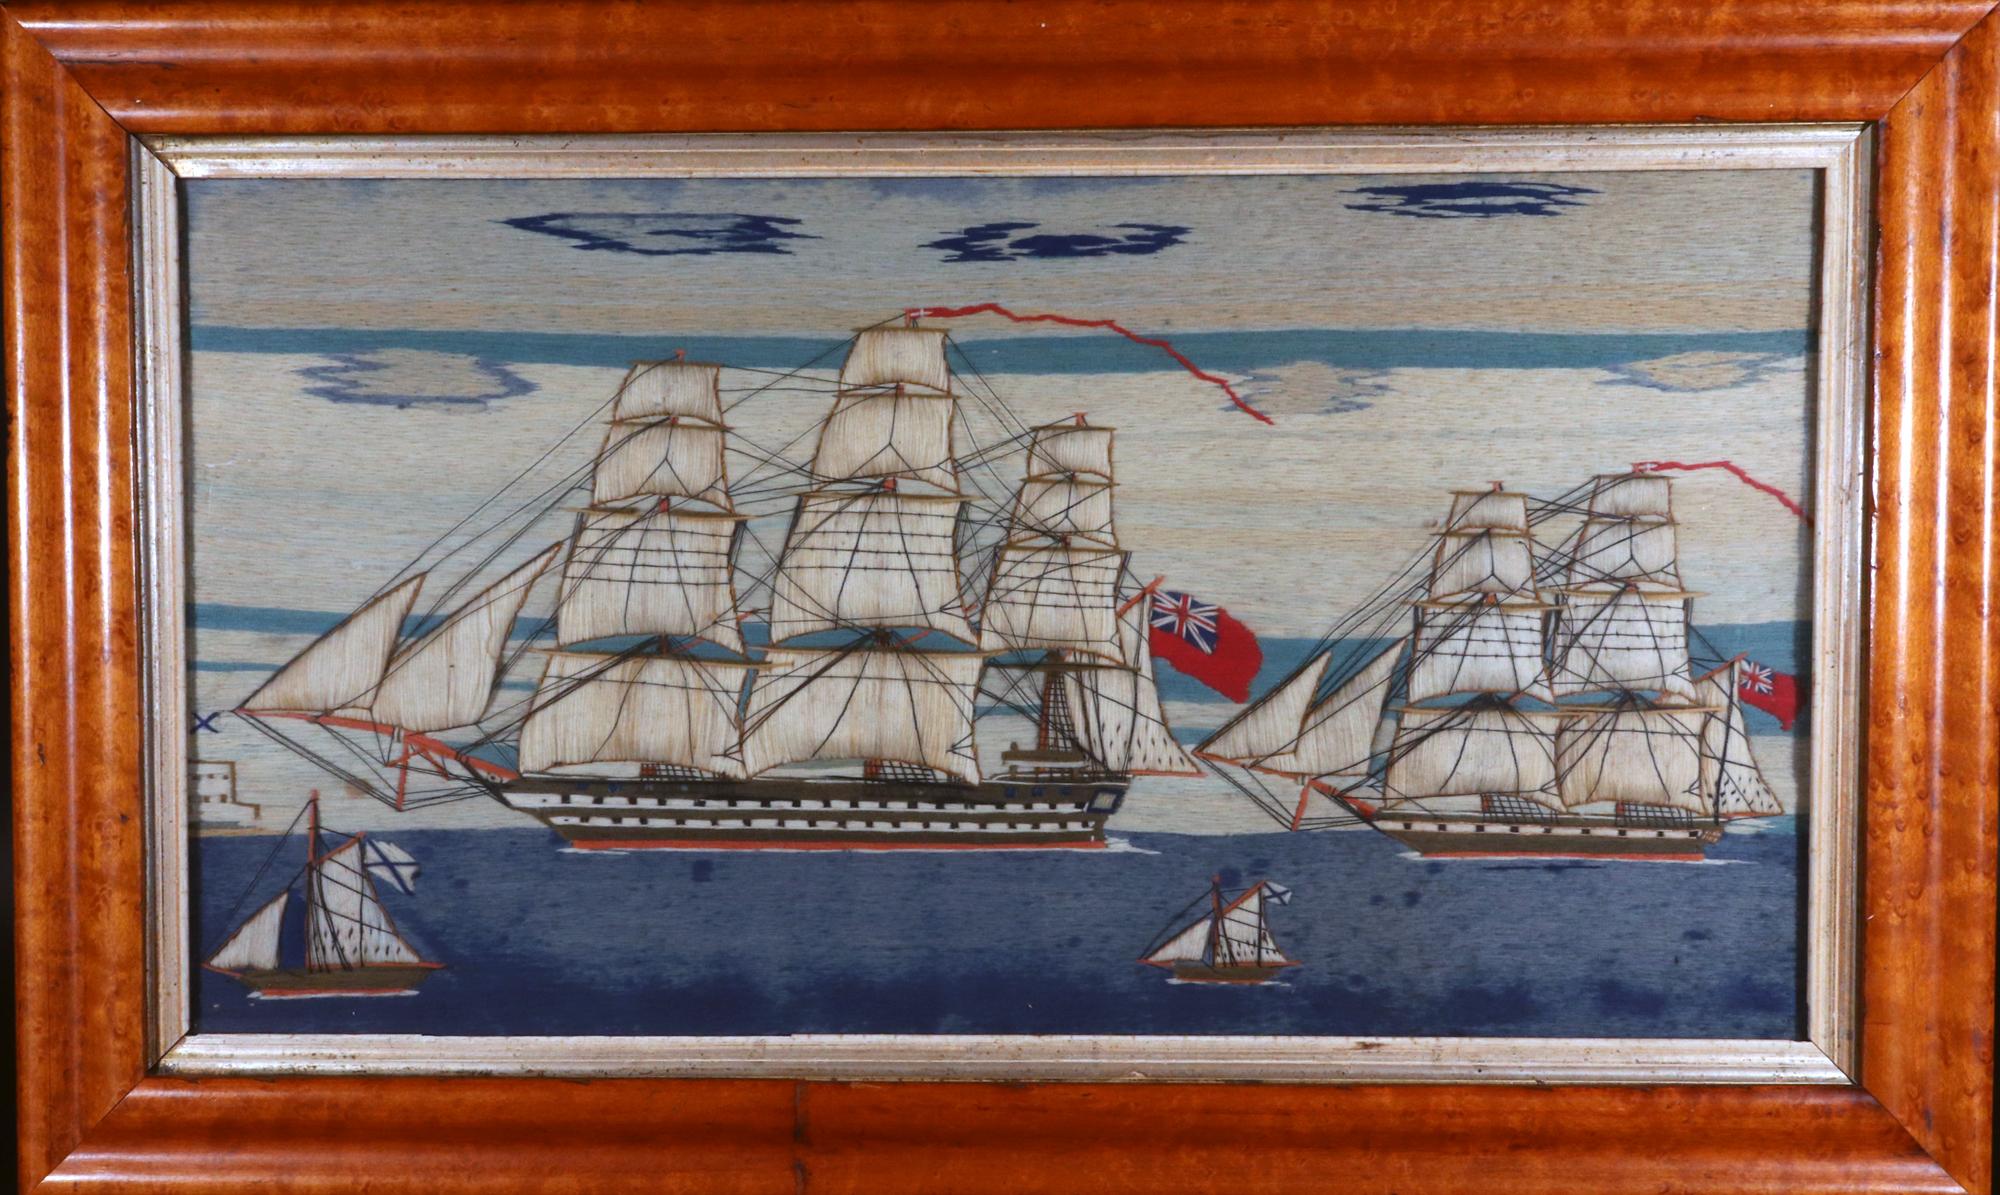 British Sailor's Woolwork of Four ships including two Royal Navy Ships,
Circa 1875

The charming small sailor's woolwork picture with a rare subject depicting a port side view of four ships coming into a Russian port.  Two Royal Navy ships, a large